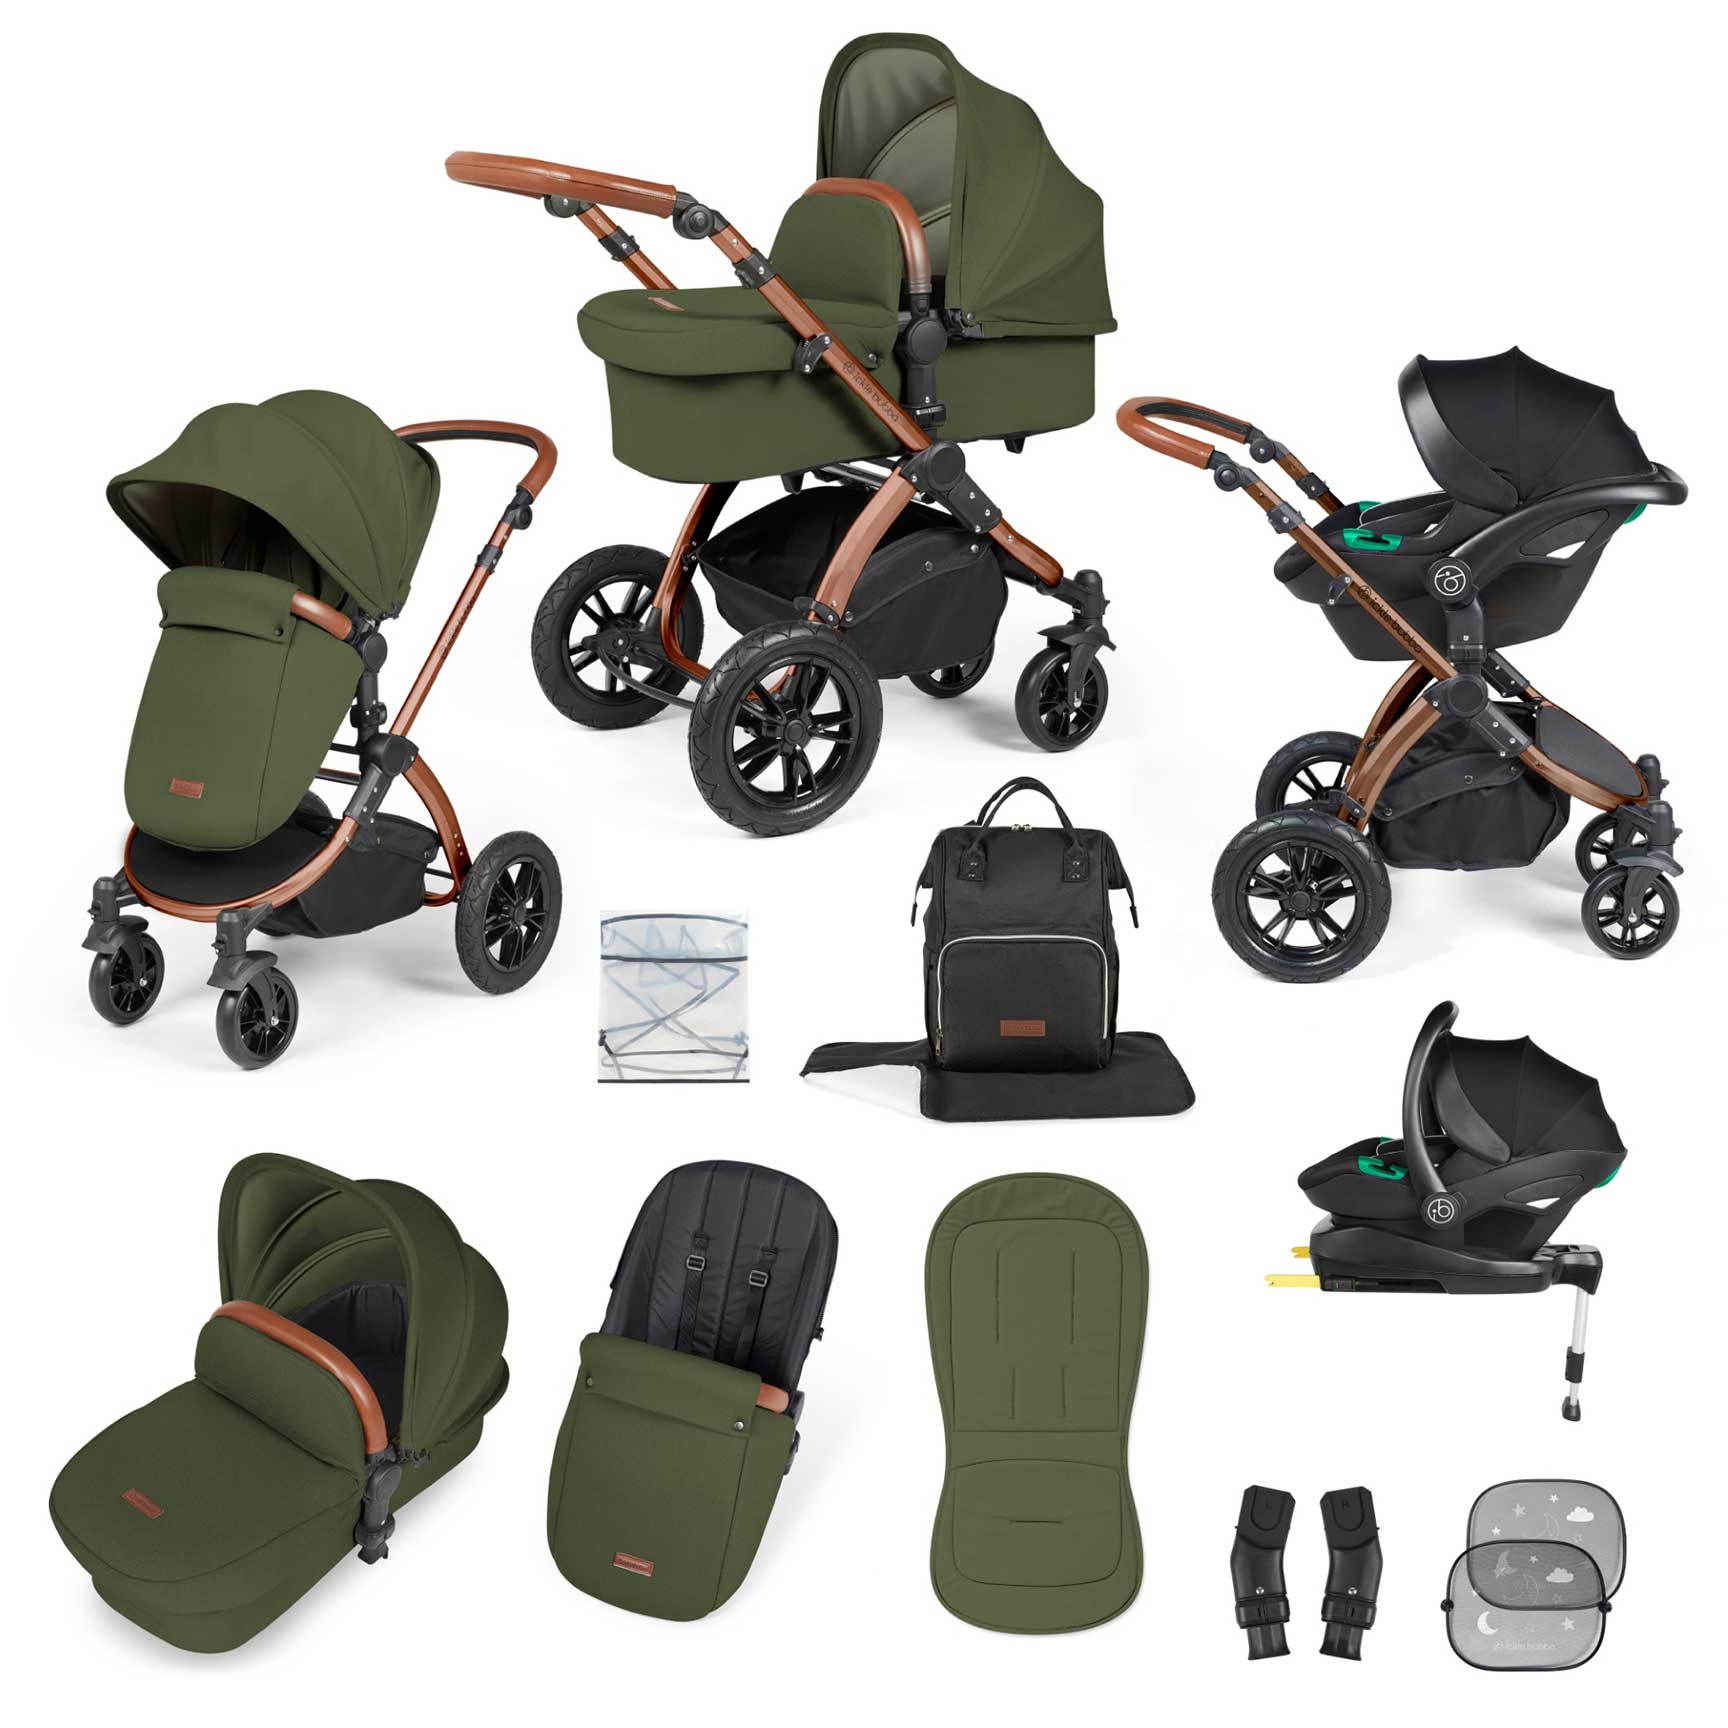 Ickle Bubba Stomp Luxe All-in-One Travel System with Isofix Base in Black/Woodland/Tan Travel Systems 10-011-300-137 5056515026504